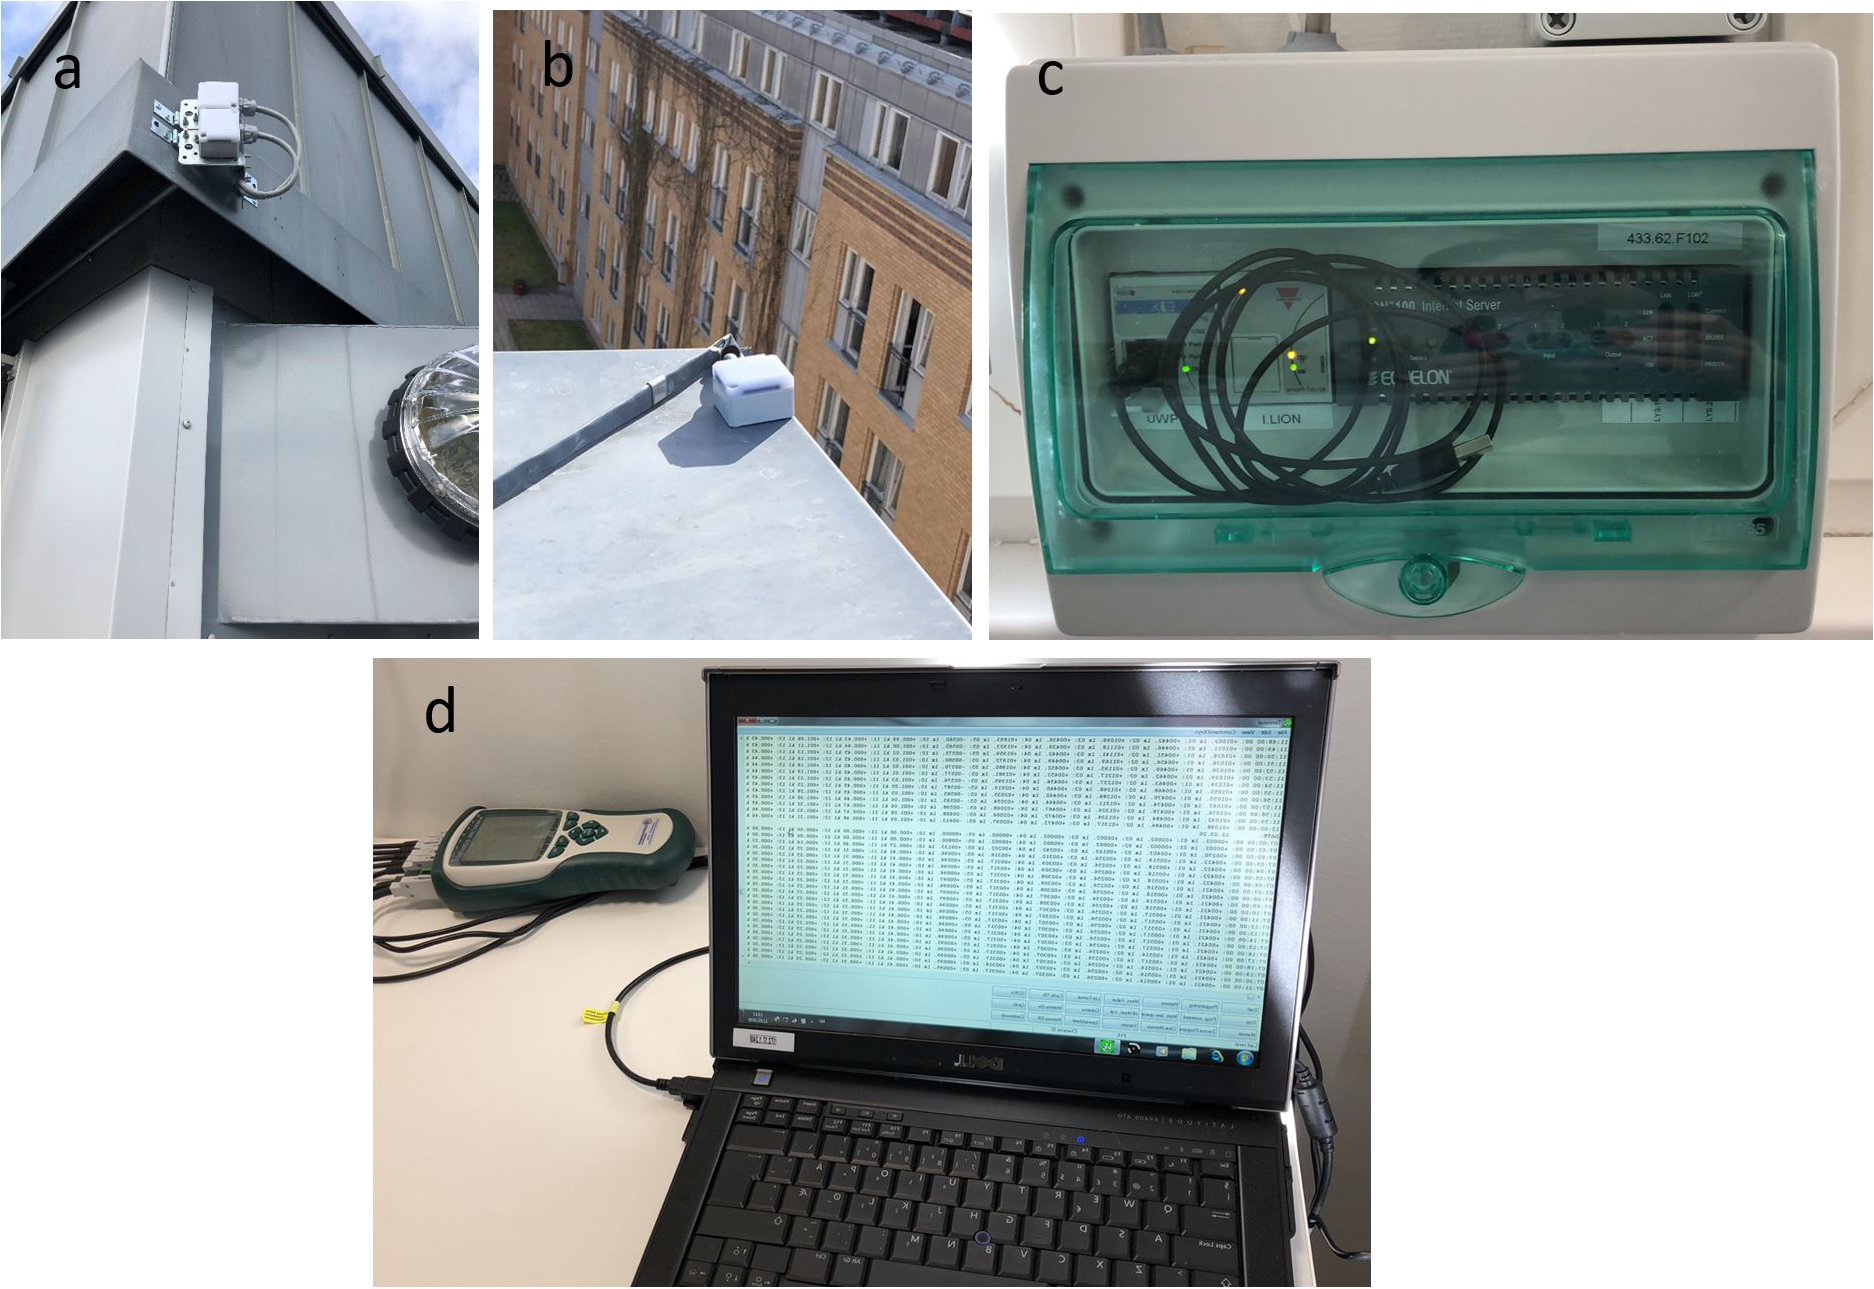 Monitoring equipment: (a) Monitoring of the VI incident on the HLP, VI im; (b) monitoring of the GHI, GHI im; (c) logging of energy consumption of each luminaire; (d) logging of the indoor illuminance measurements from the five illuminance meters.